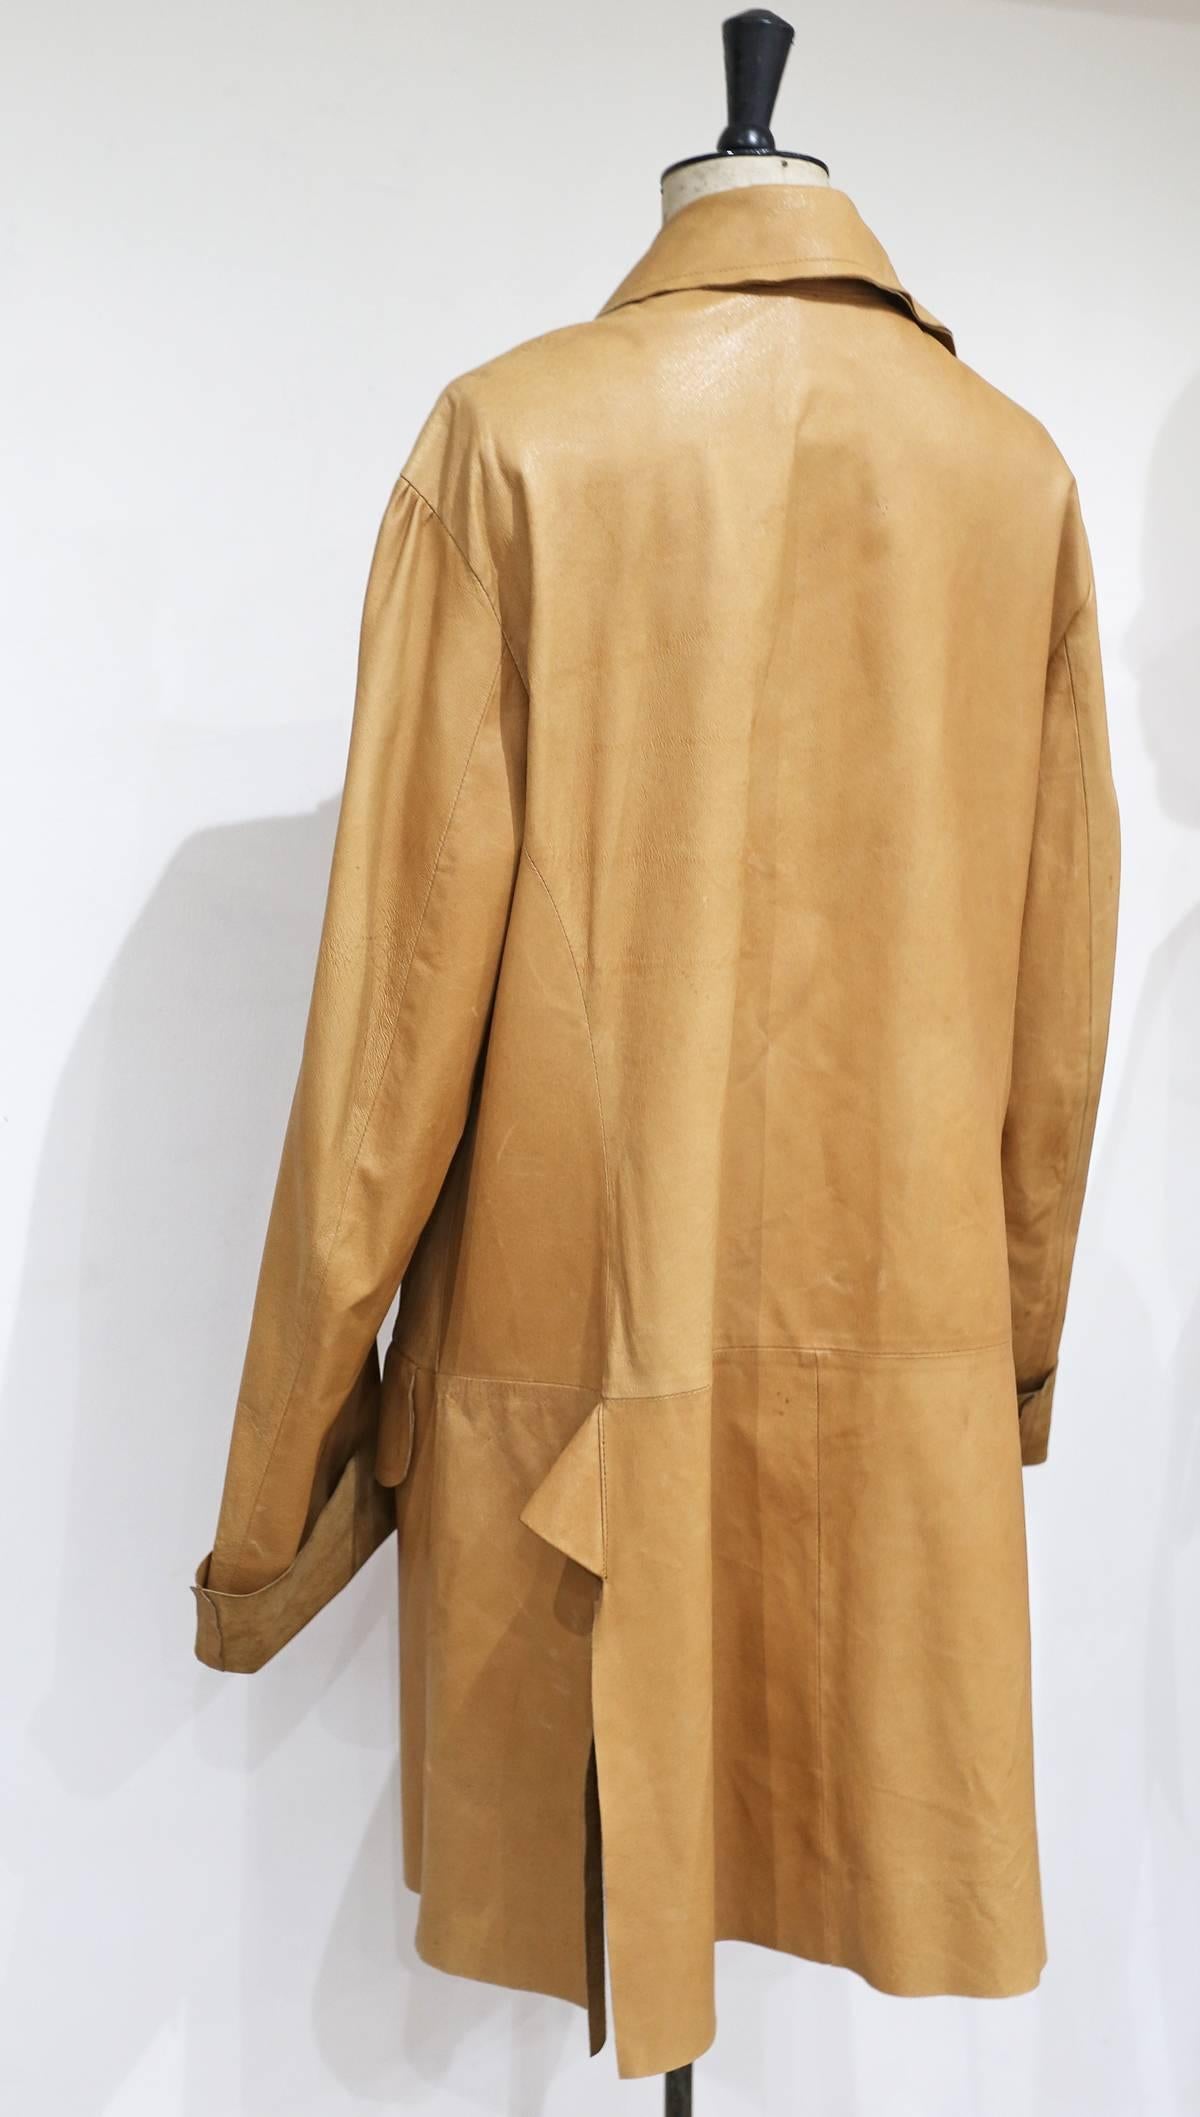 Brown Worlds End by Vivienne Westwood and Malcolm Mclaren raw cut leather coat, c.1981